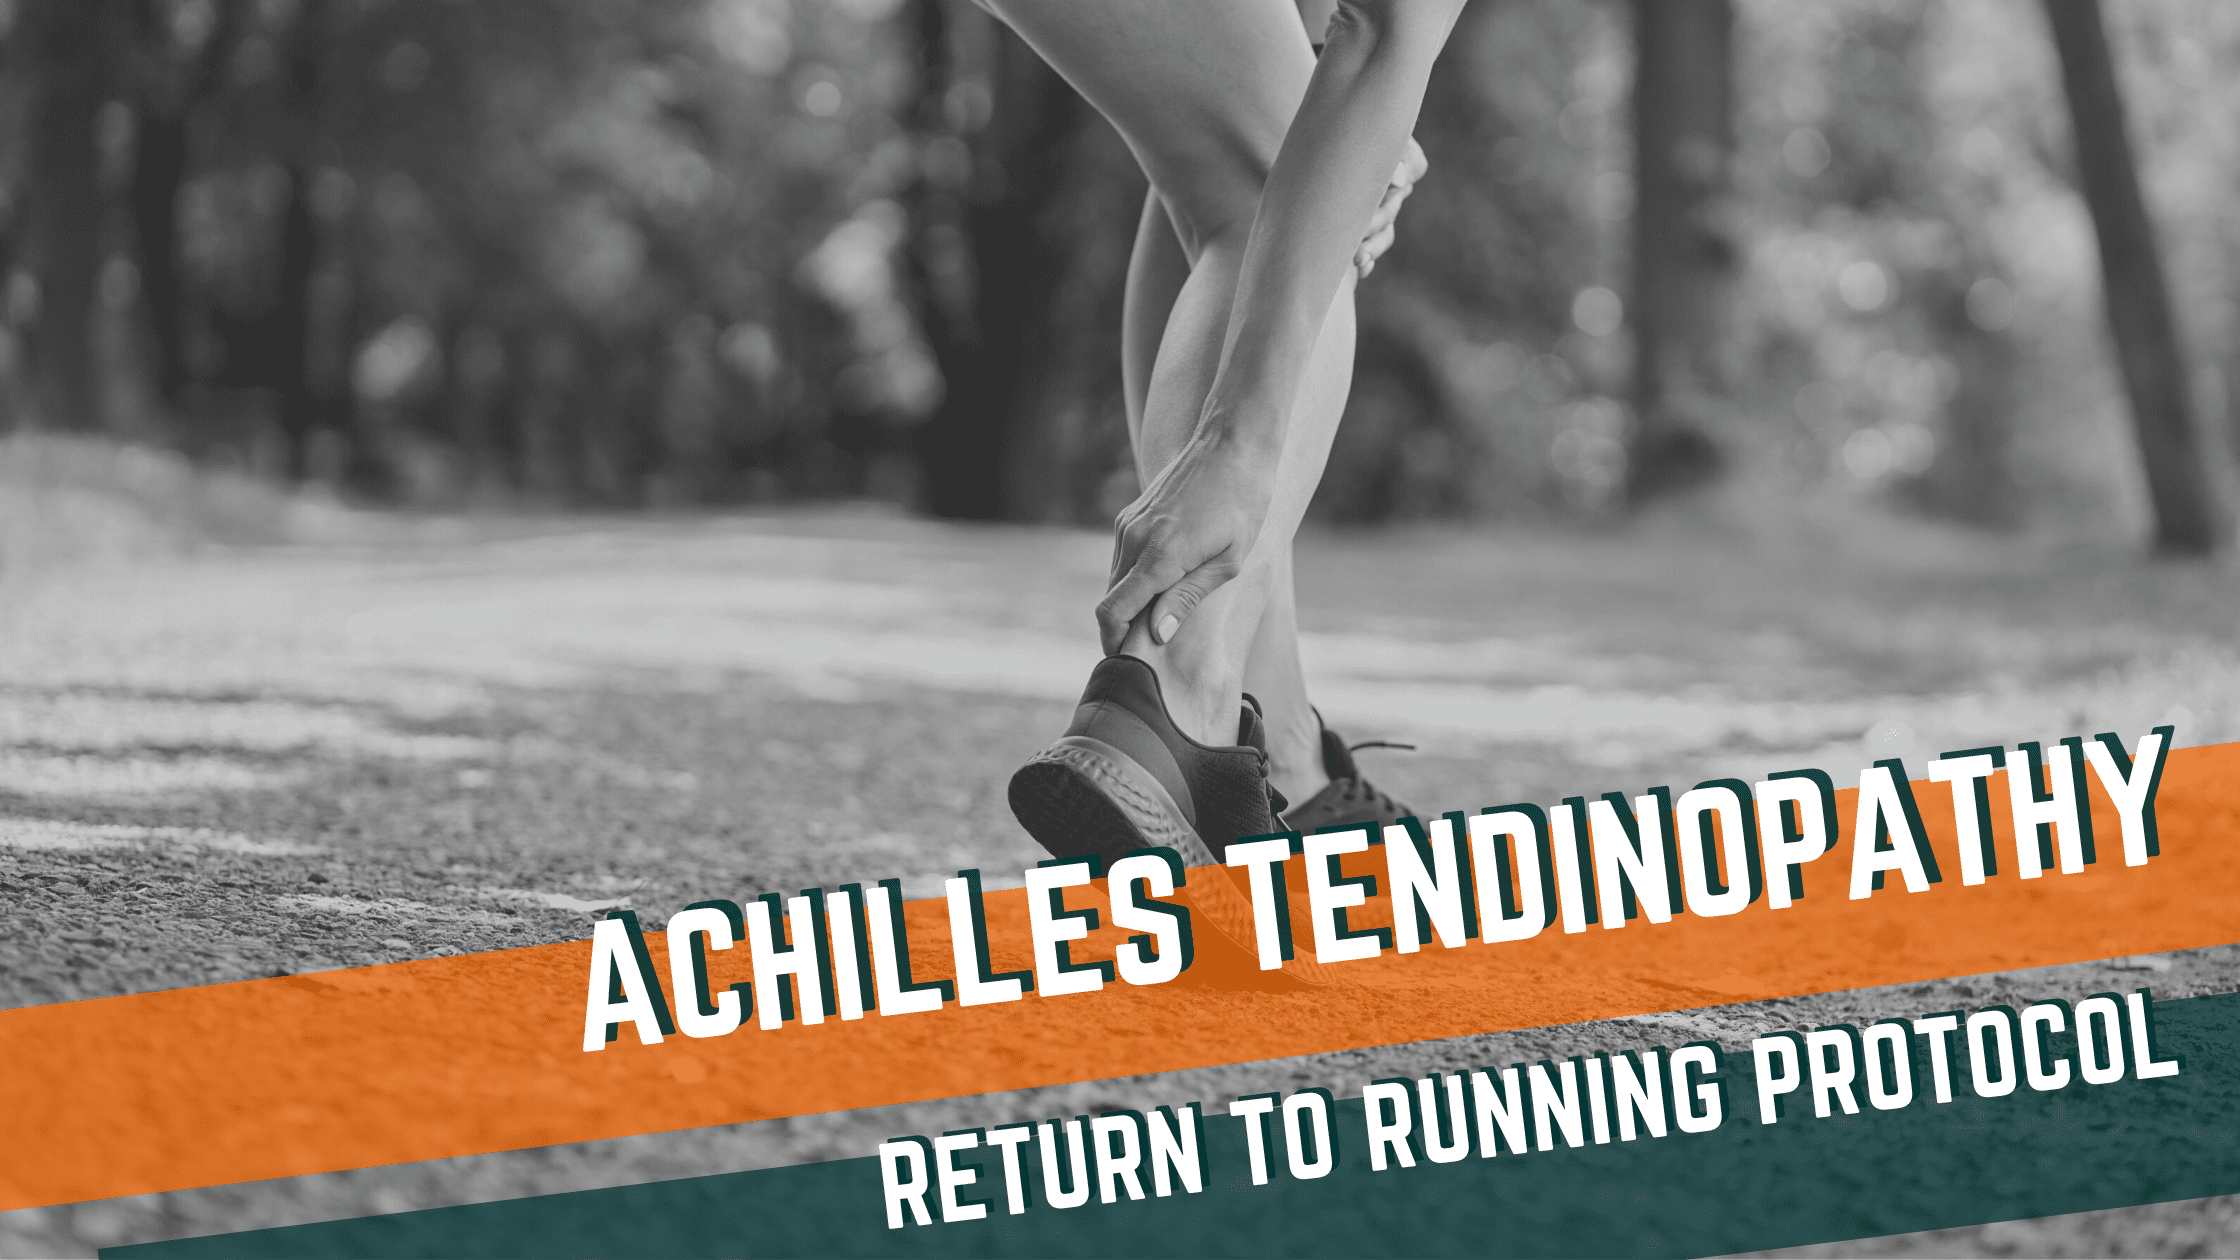 Featured image for “Achilles Tendinopathy Return to Running Protocol”